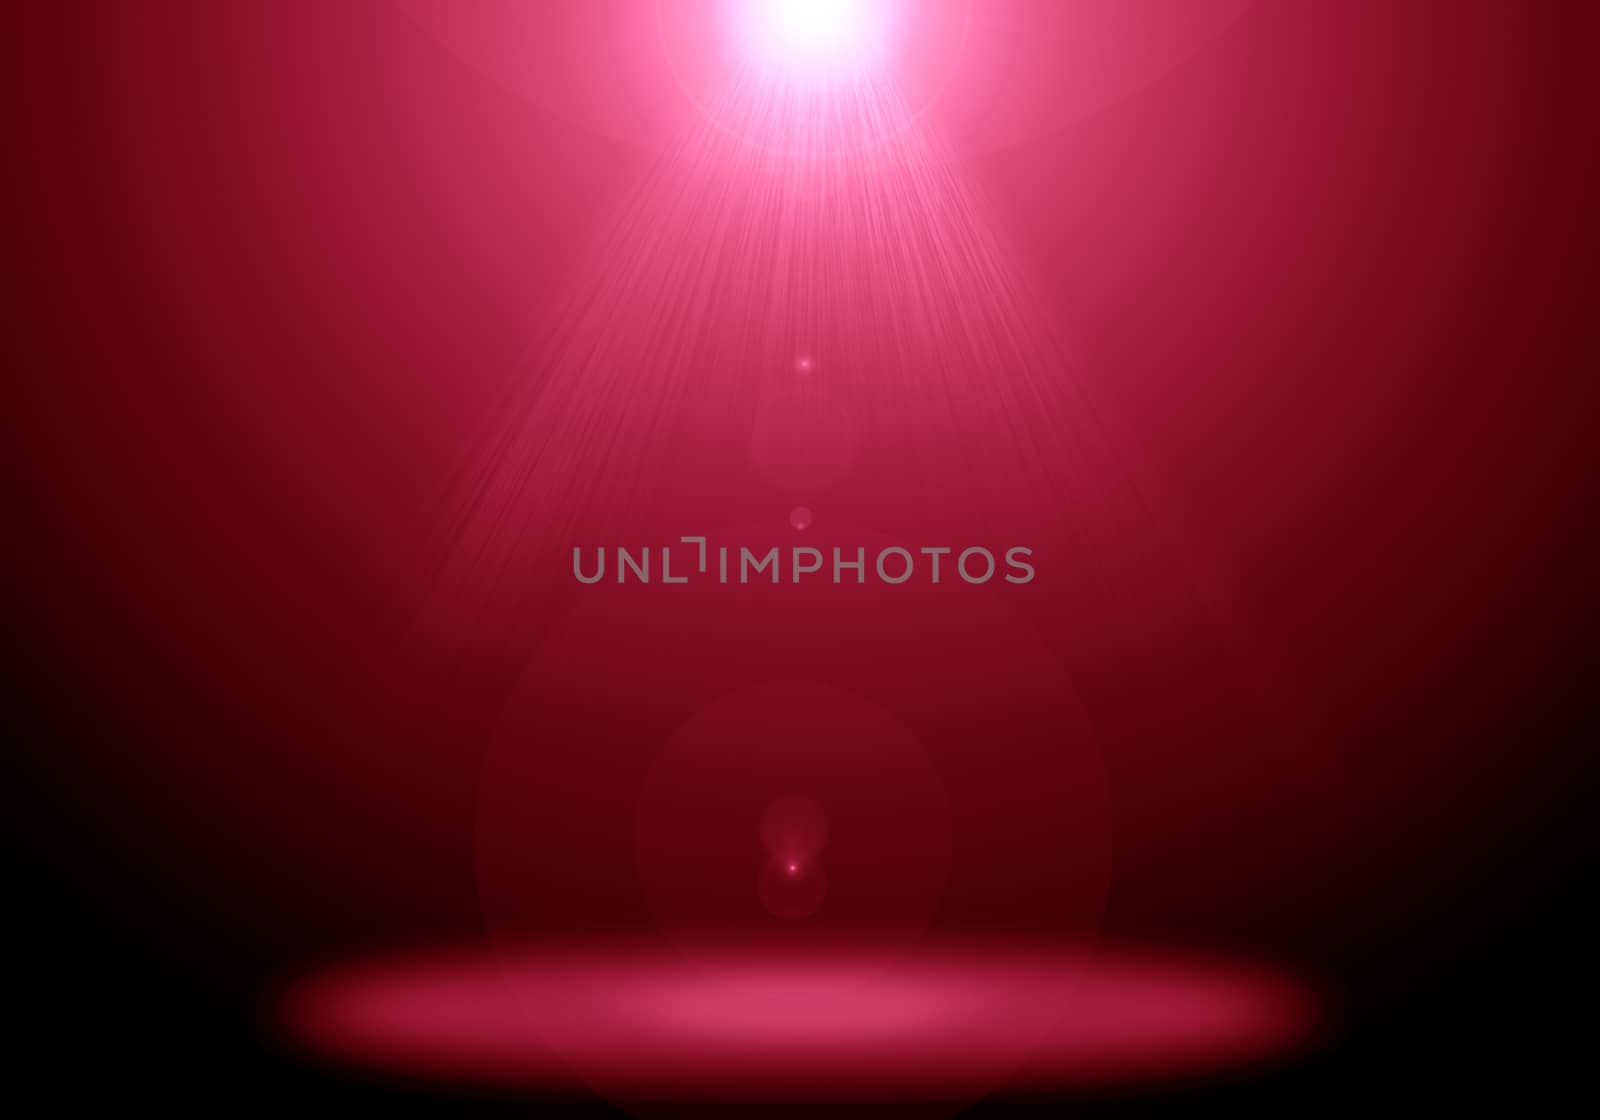 Abstract image of red lighting flare on the floor stage. by jayzynism